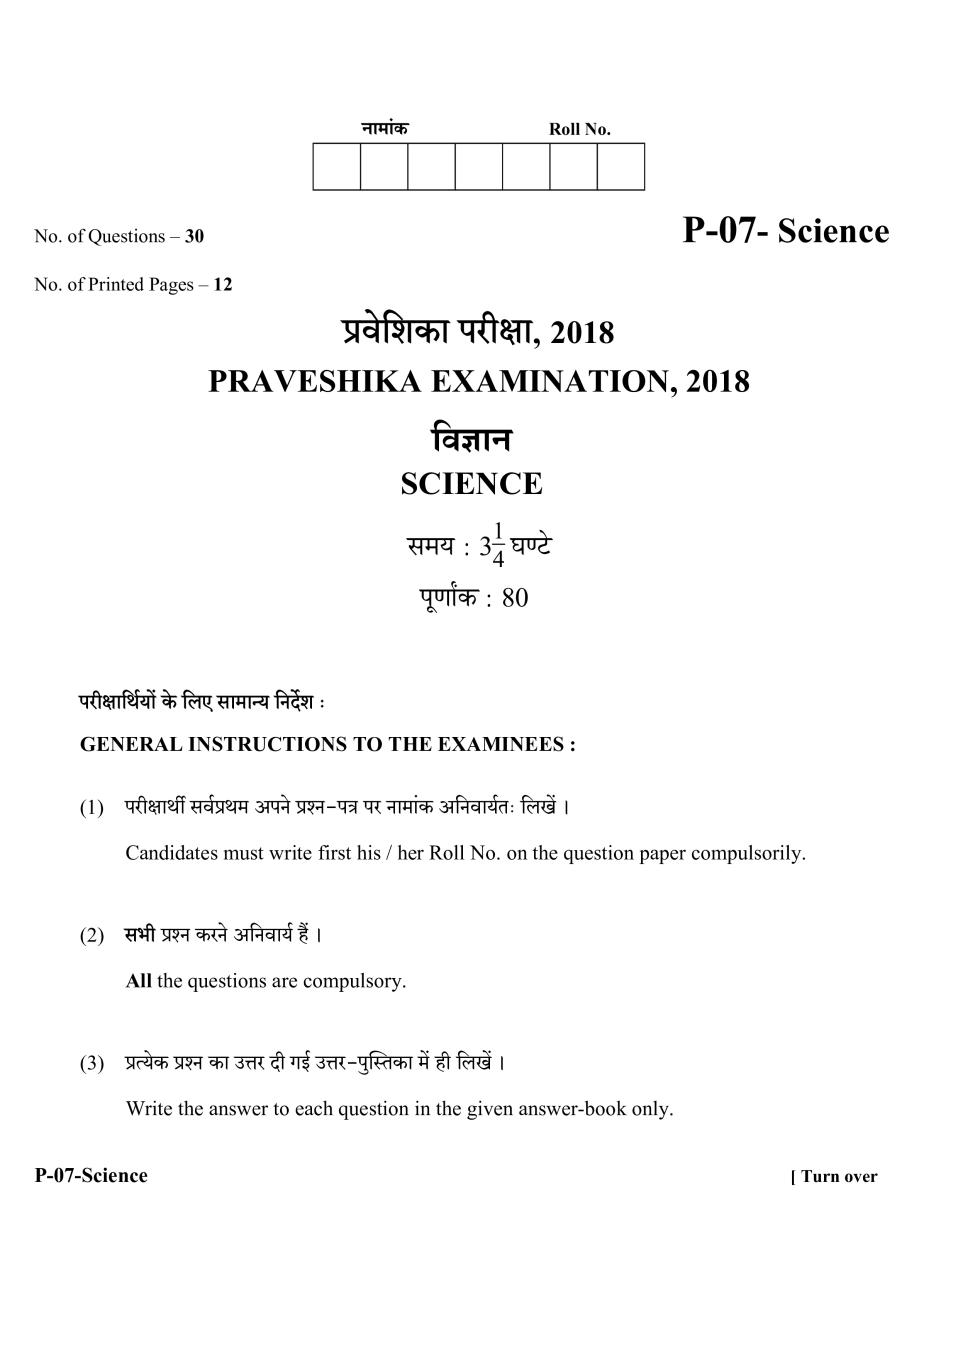 Rajasthan Board Praveshika Science Question Paper 2018 - Page 1